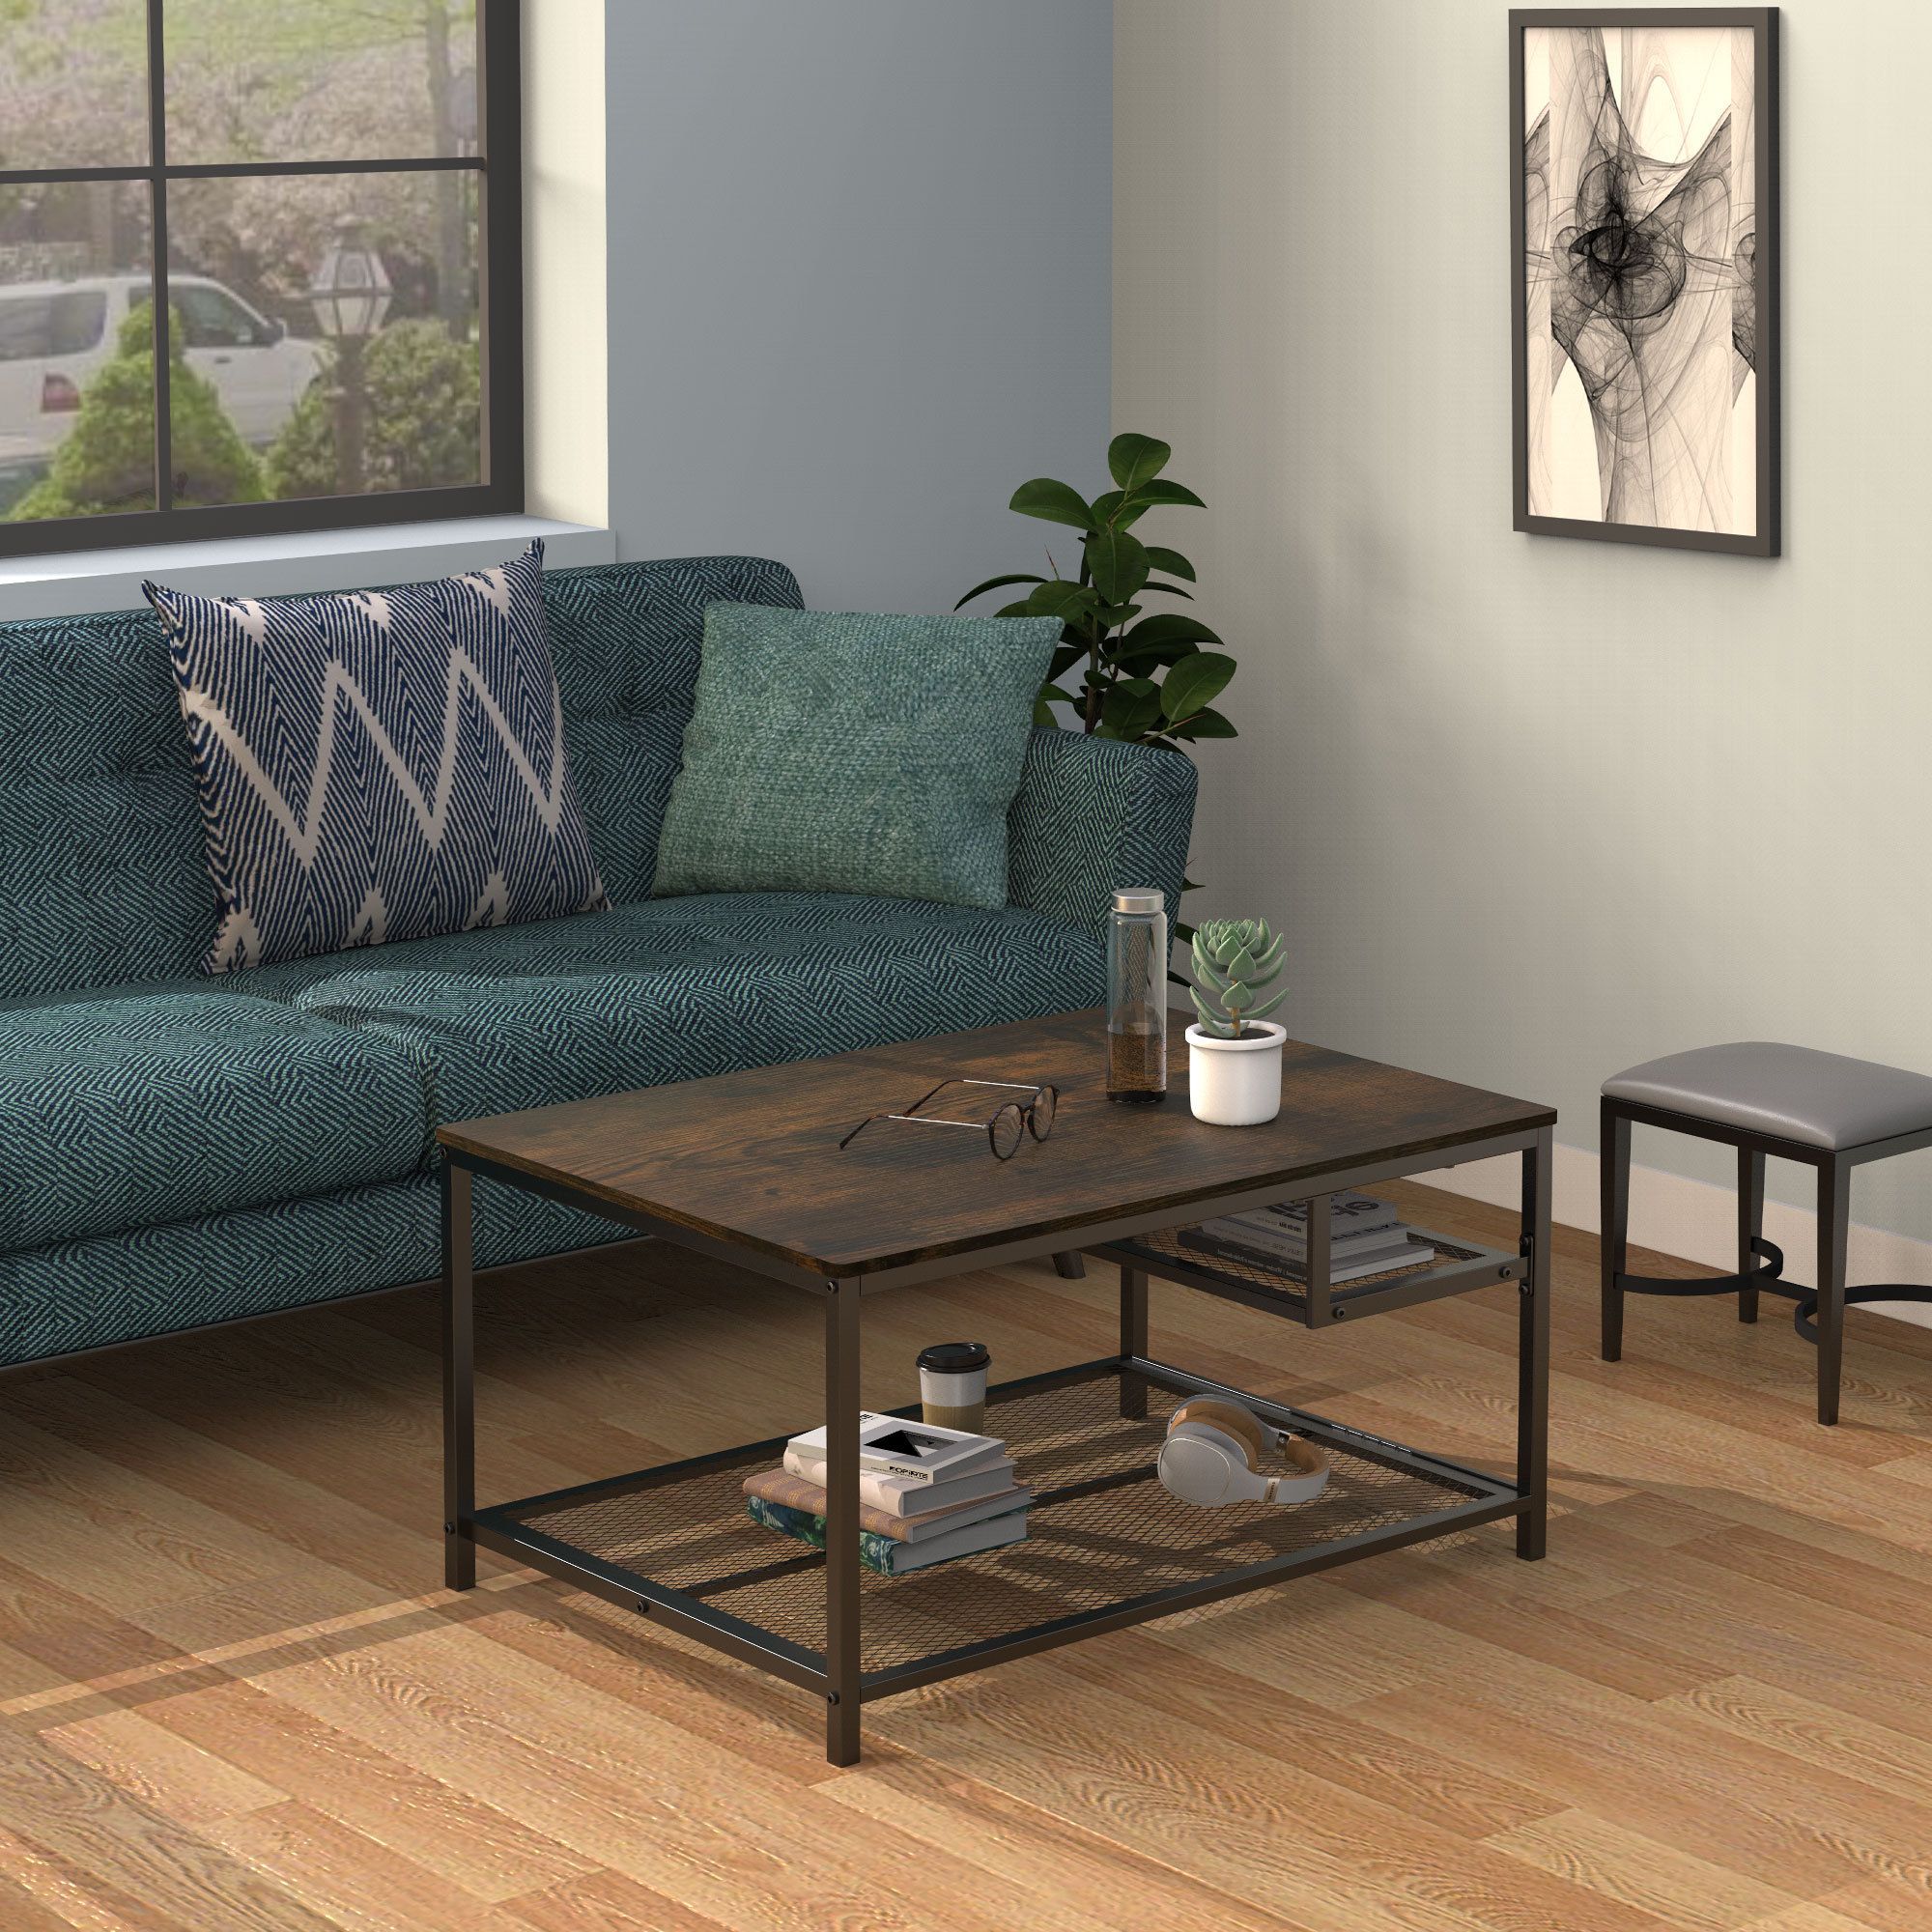 Anysun Industrial Wood And Metal Coffee Table With 2 Tiered Shelf, Brown –  Walmart Intended For 2 Tier Metal Coffee Tables (View 10 of 15)